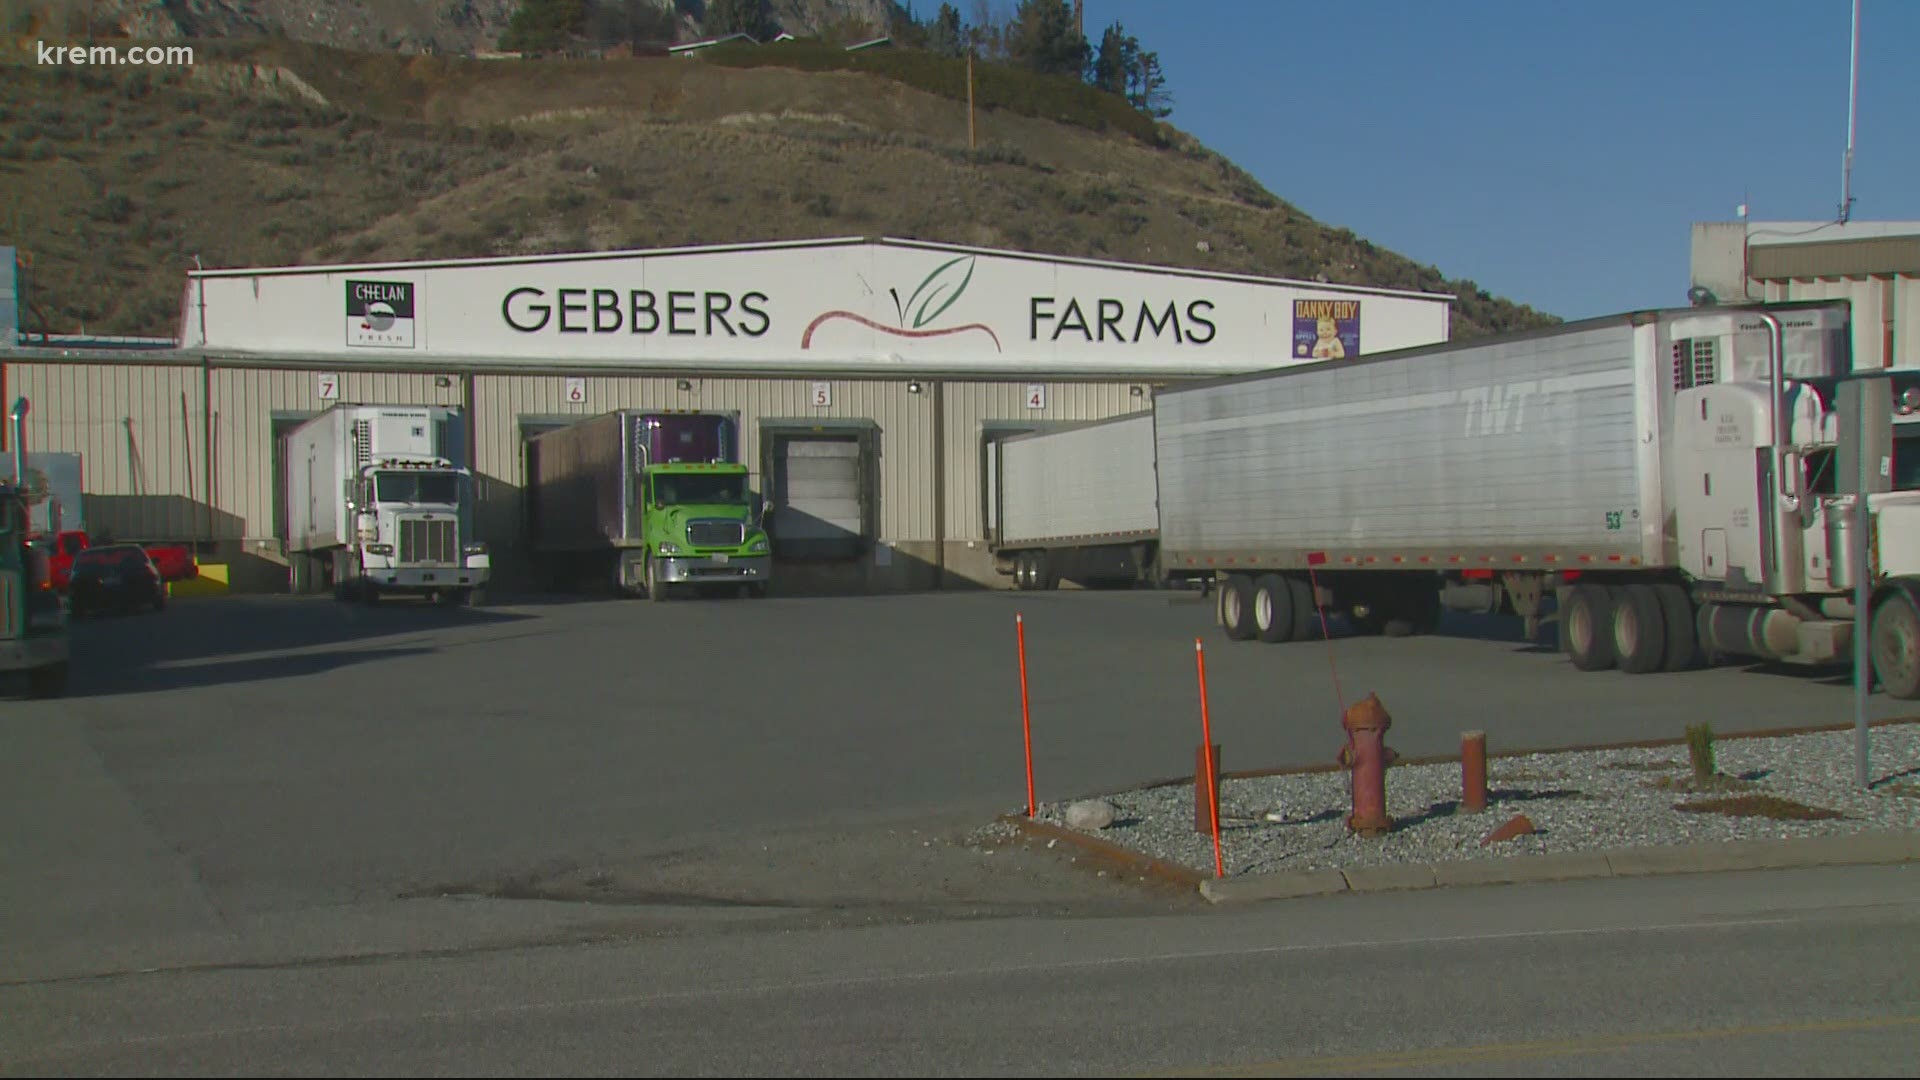 Gebbers Farm Operations is facing one of the largest workplace health and safety fines in Washington state history.